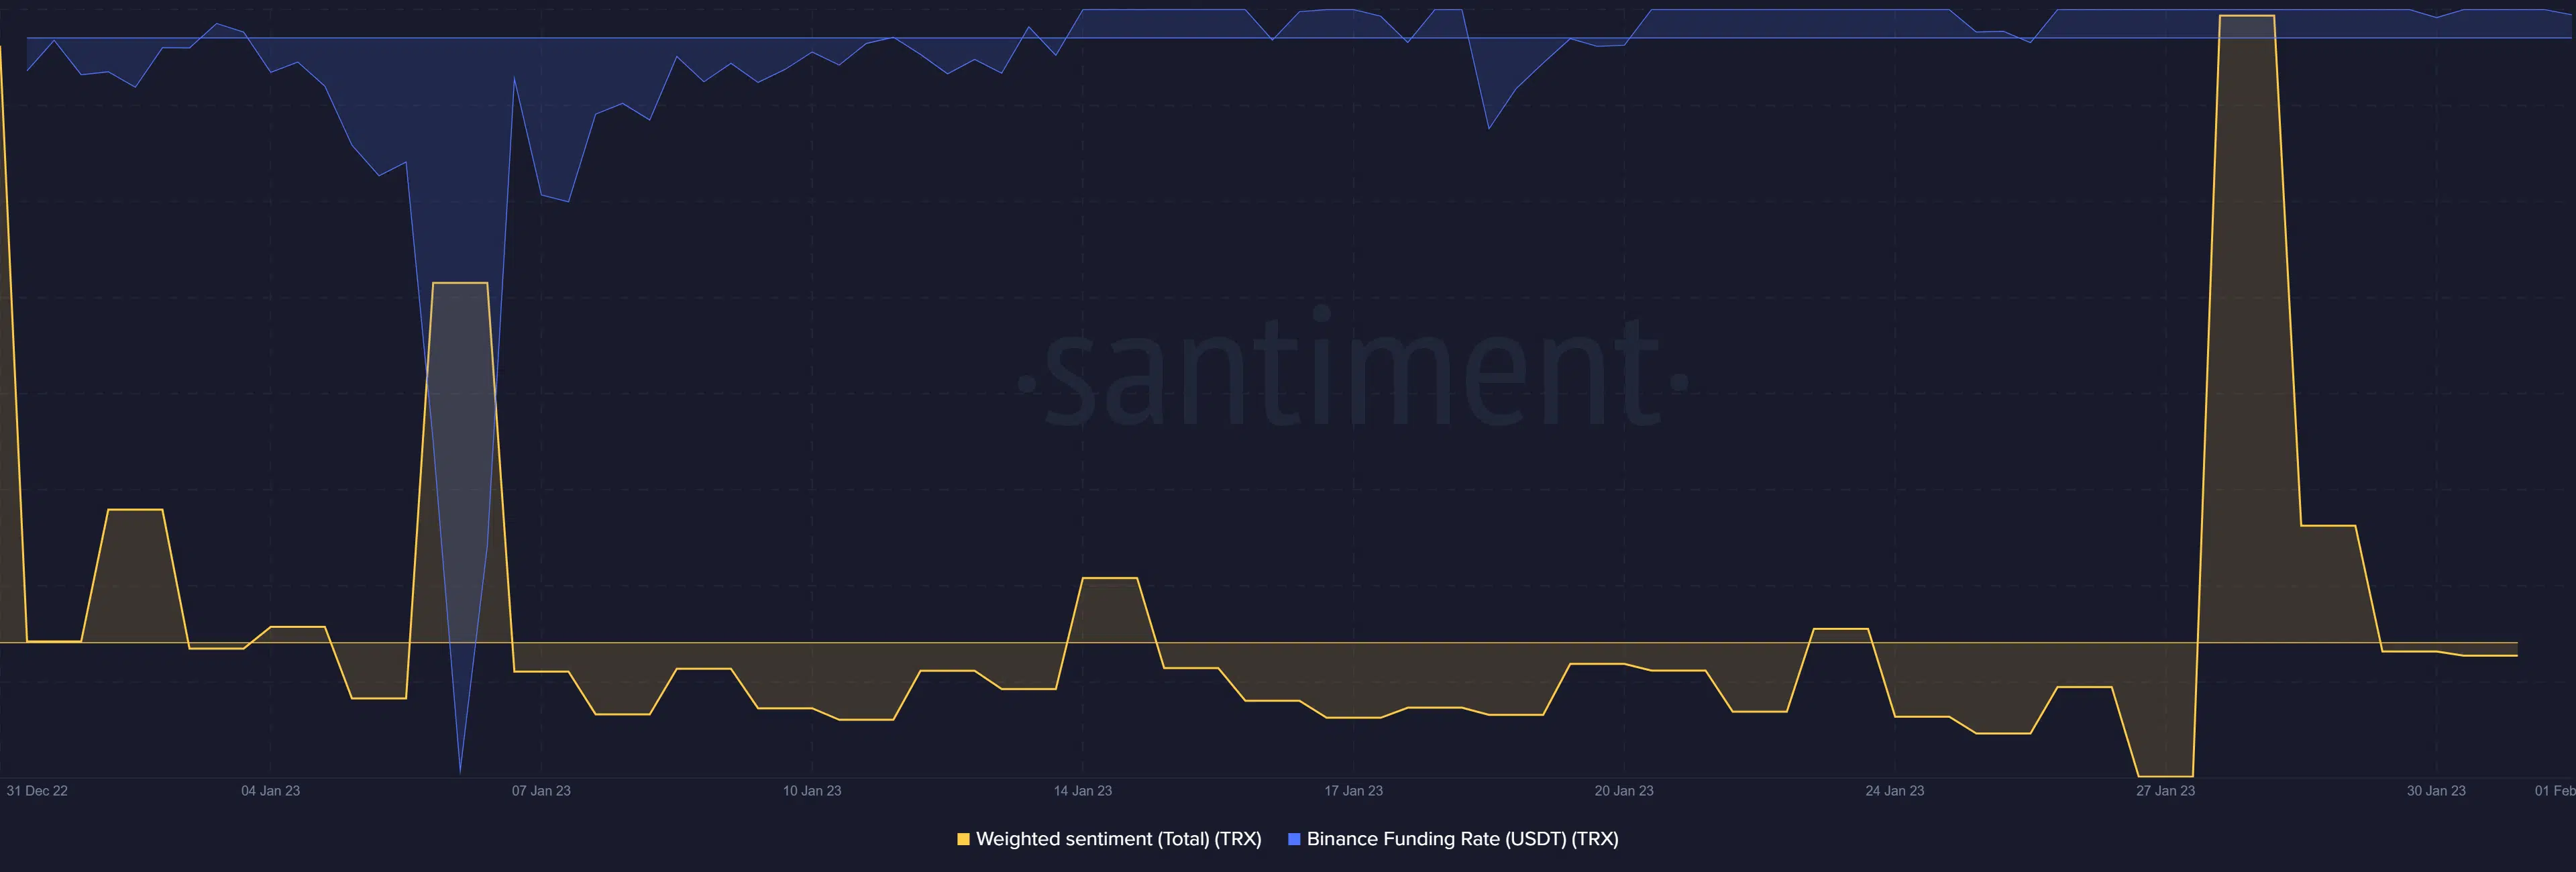 Tron weighted sentiment and Binance funding rate